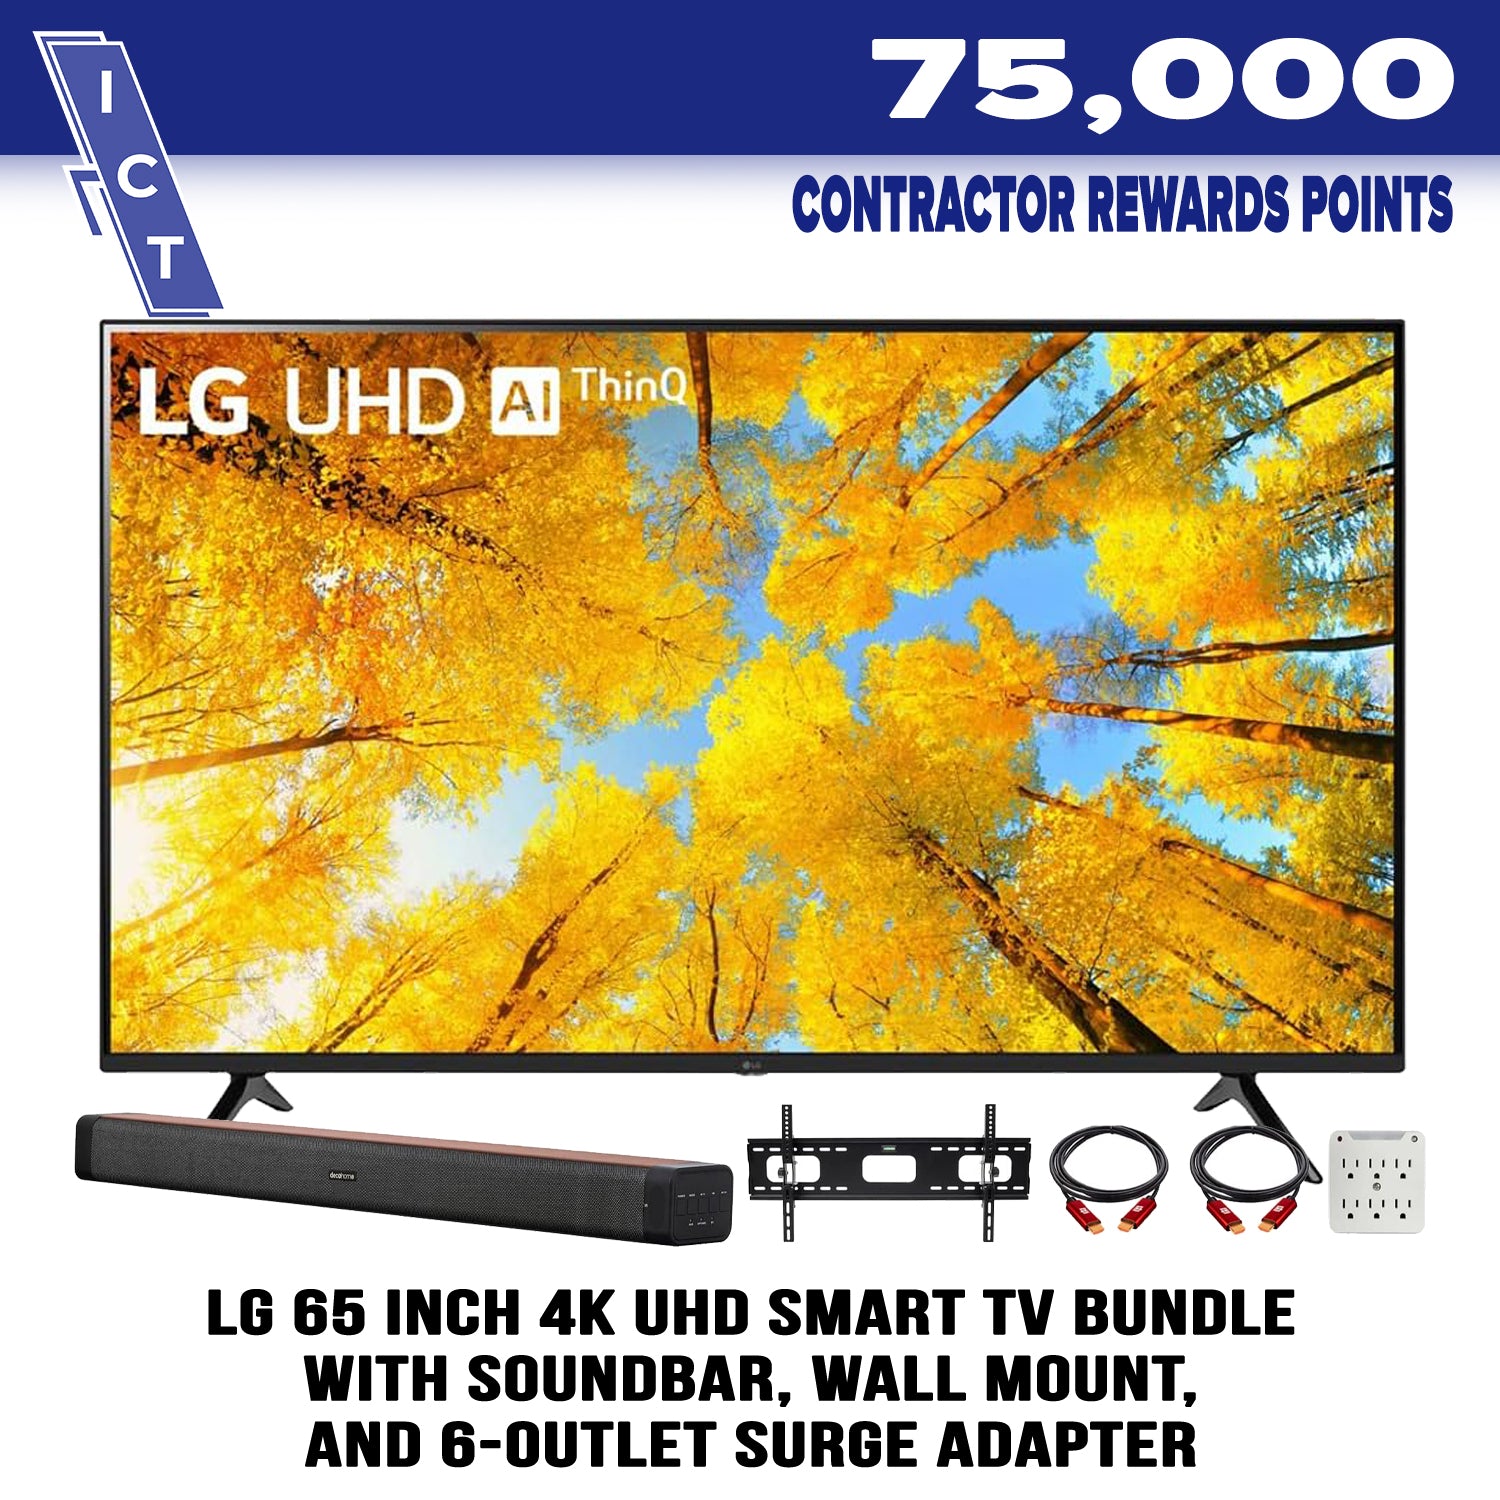 LG Home Theater Bundle for 75000 points